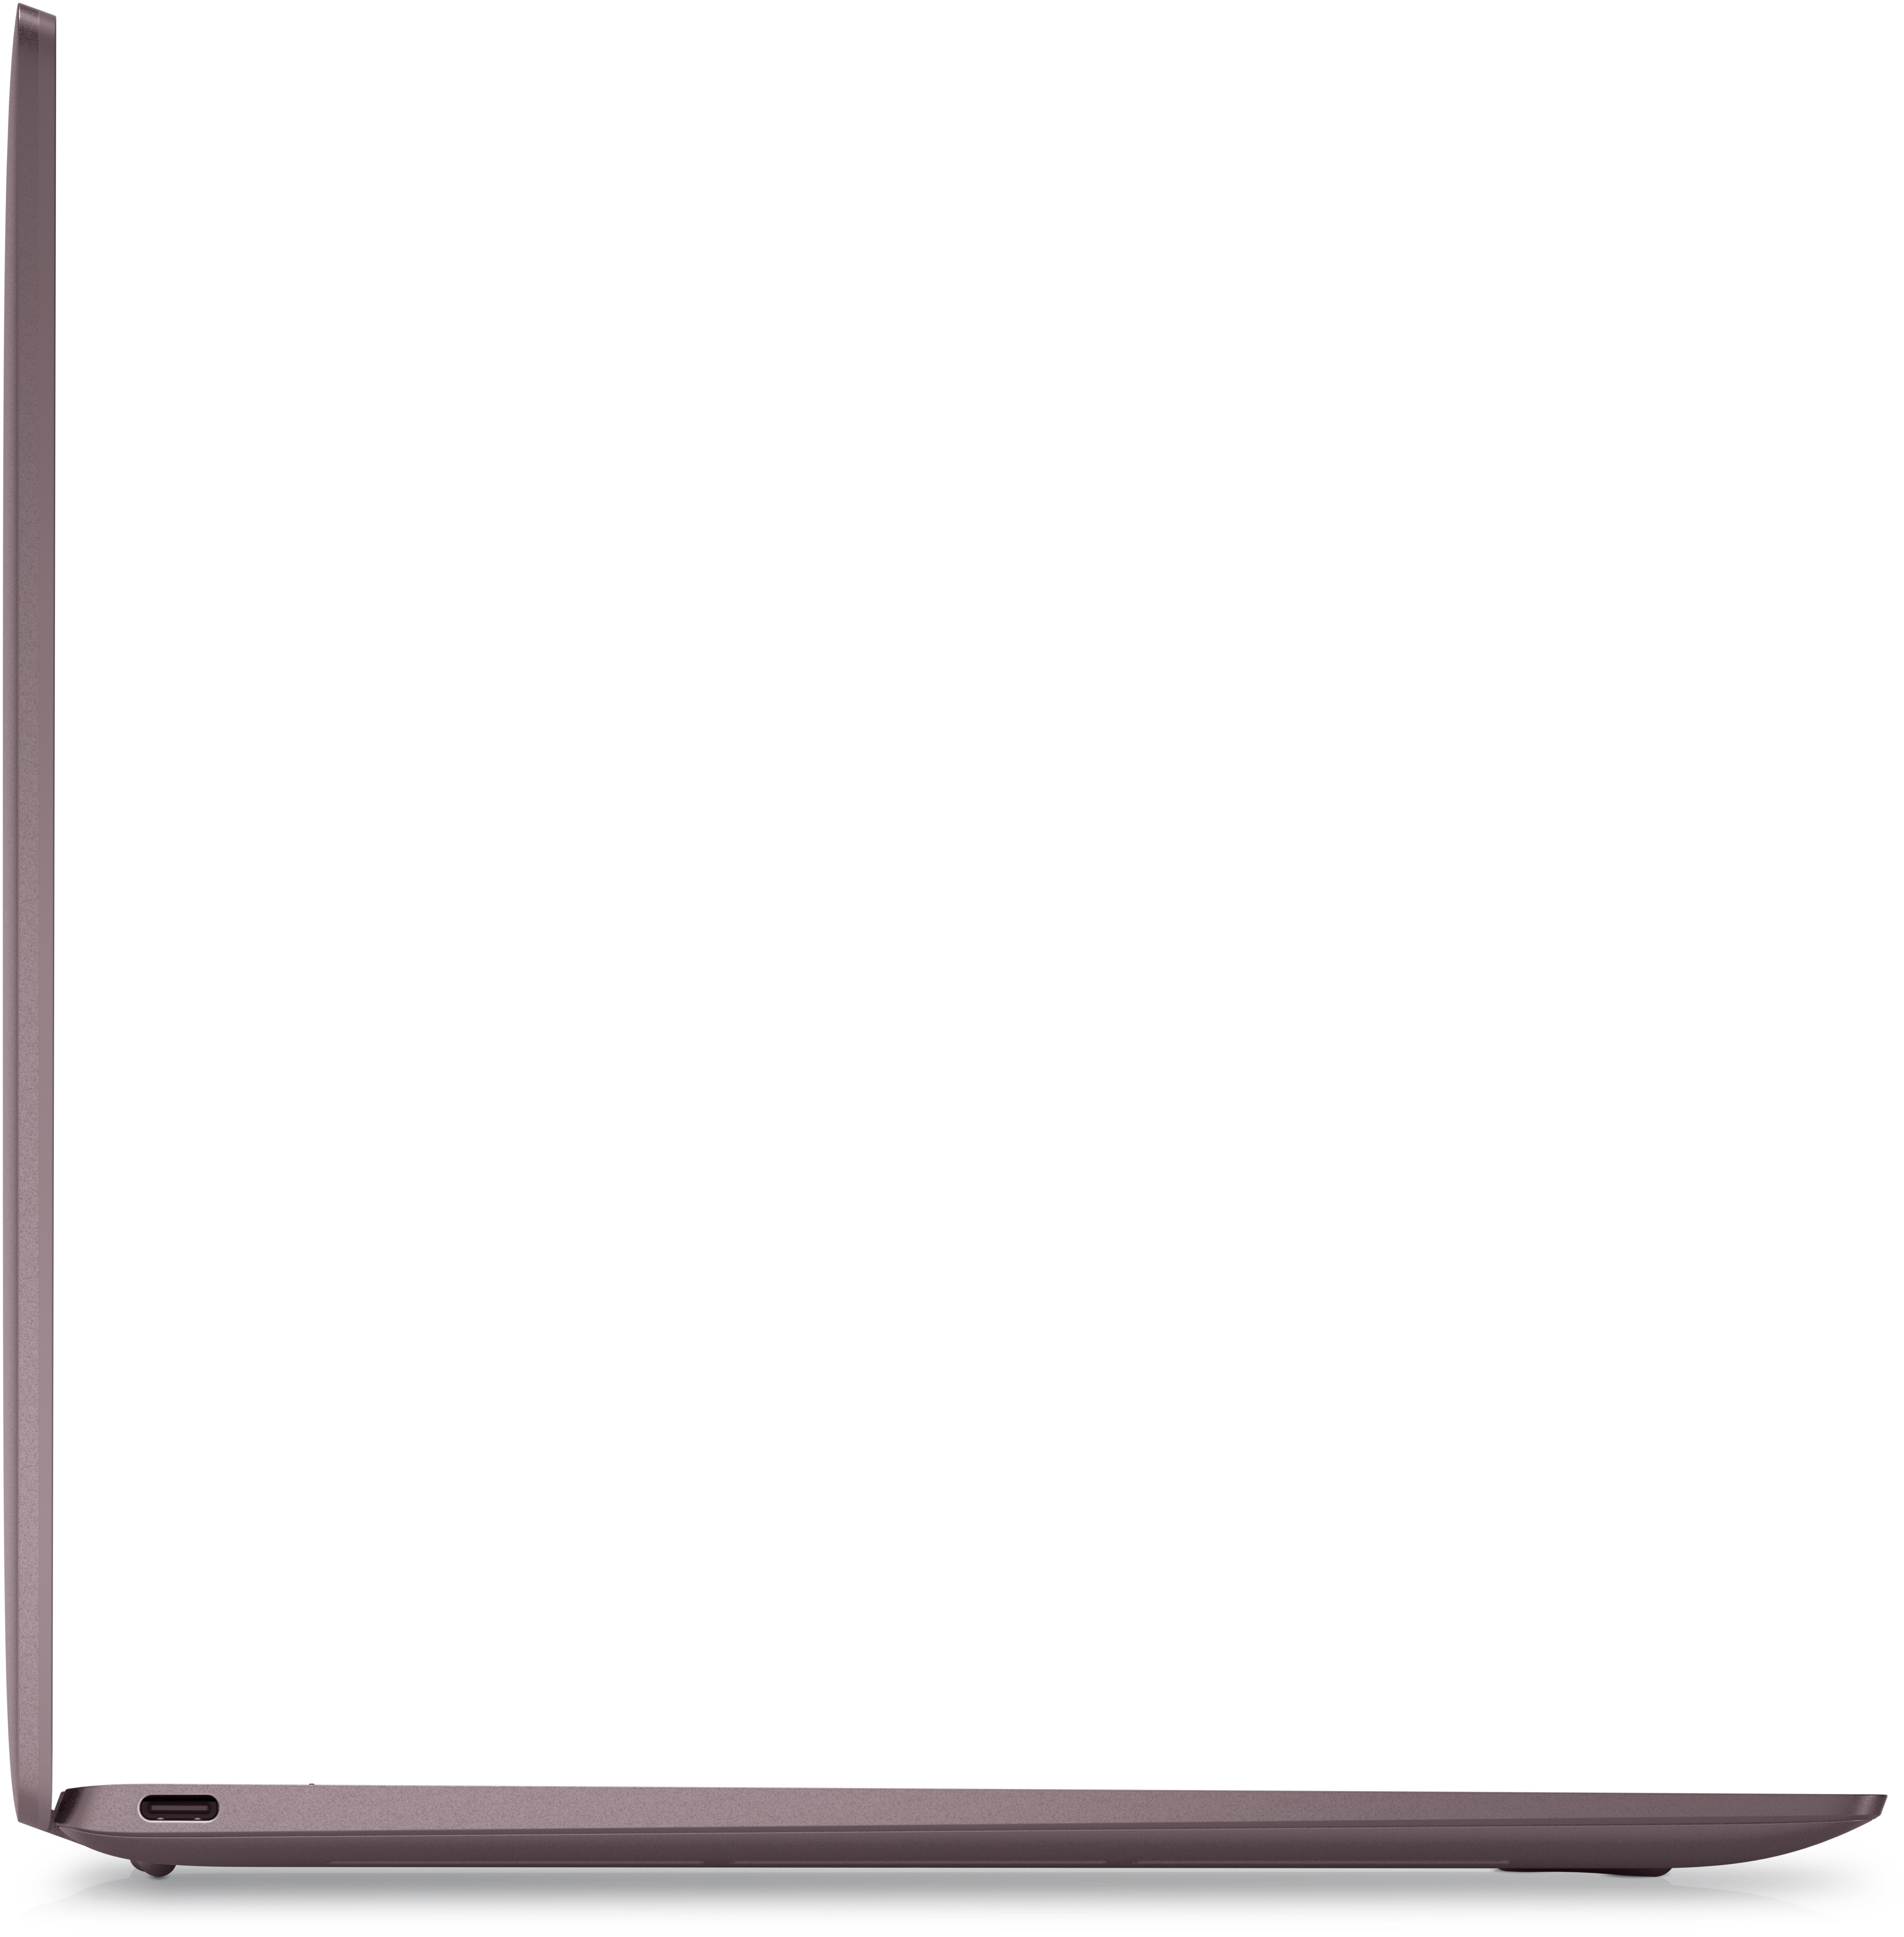 XPS 13 Laptop - Dell XPS 13-inch Laptop Computers | Dell Canada